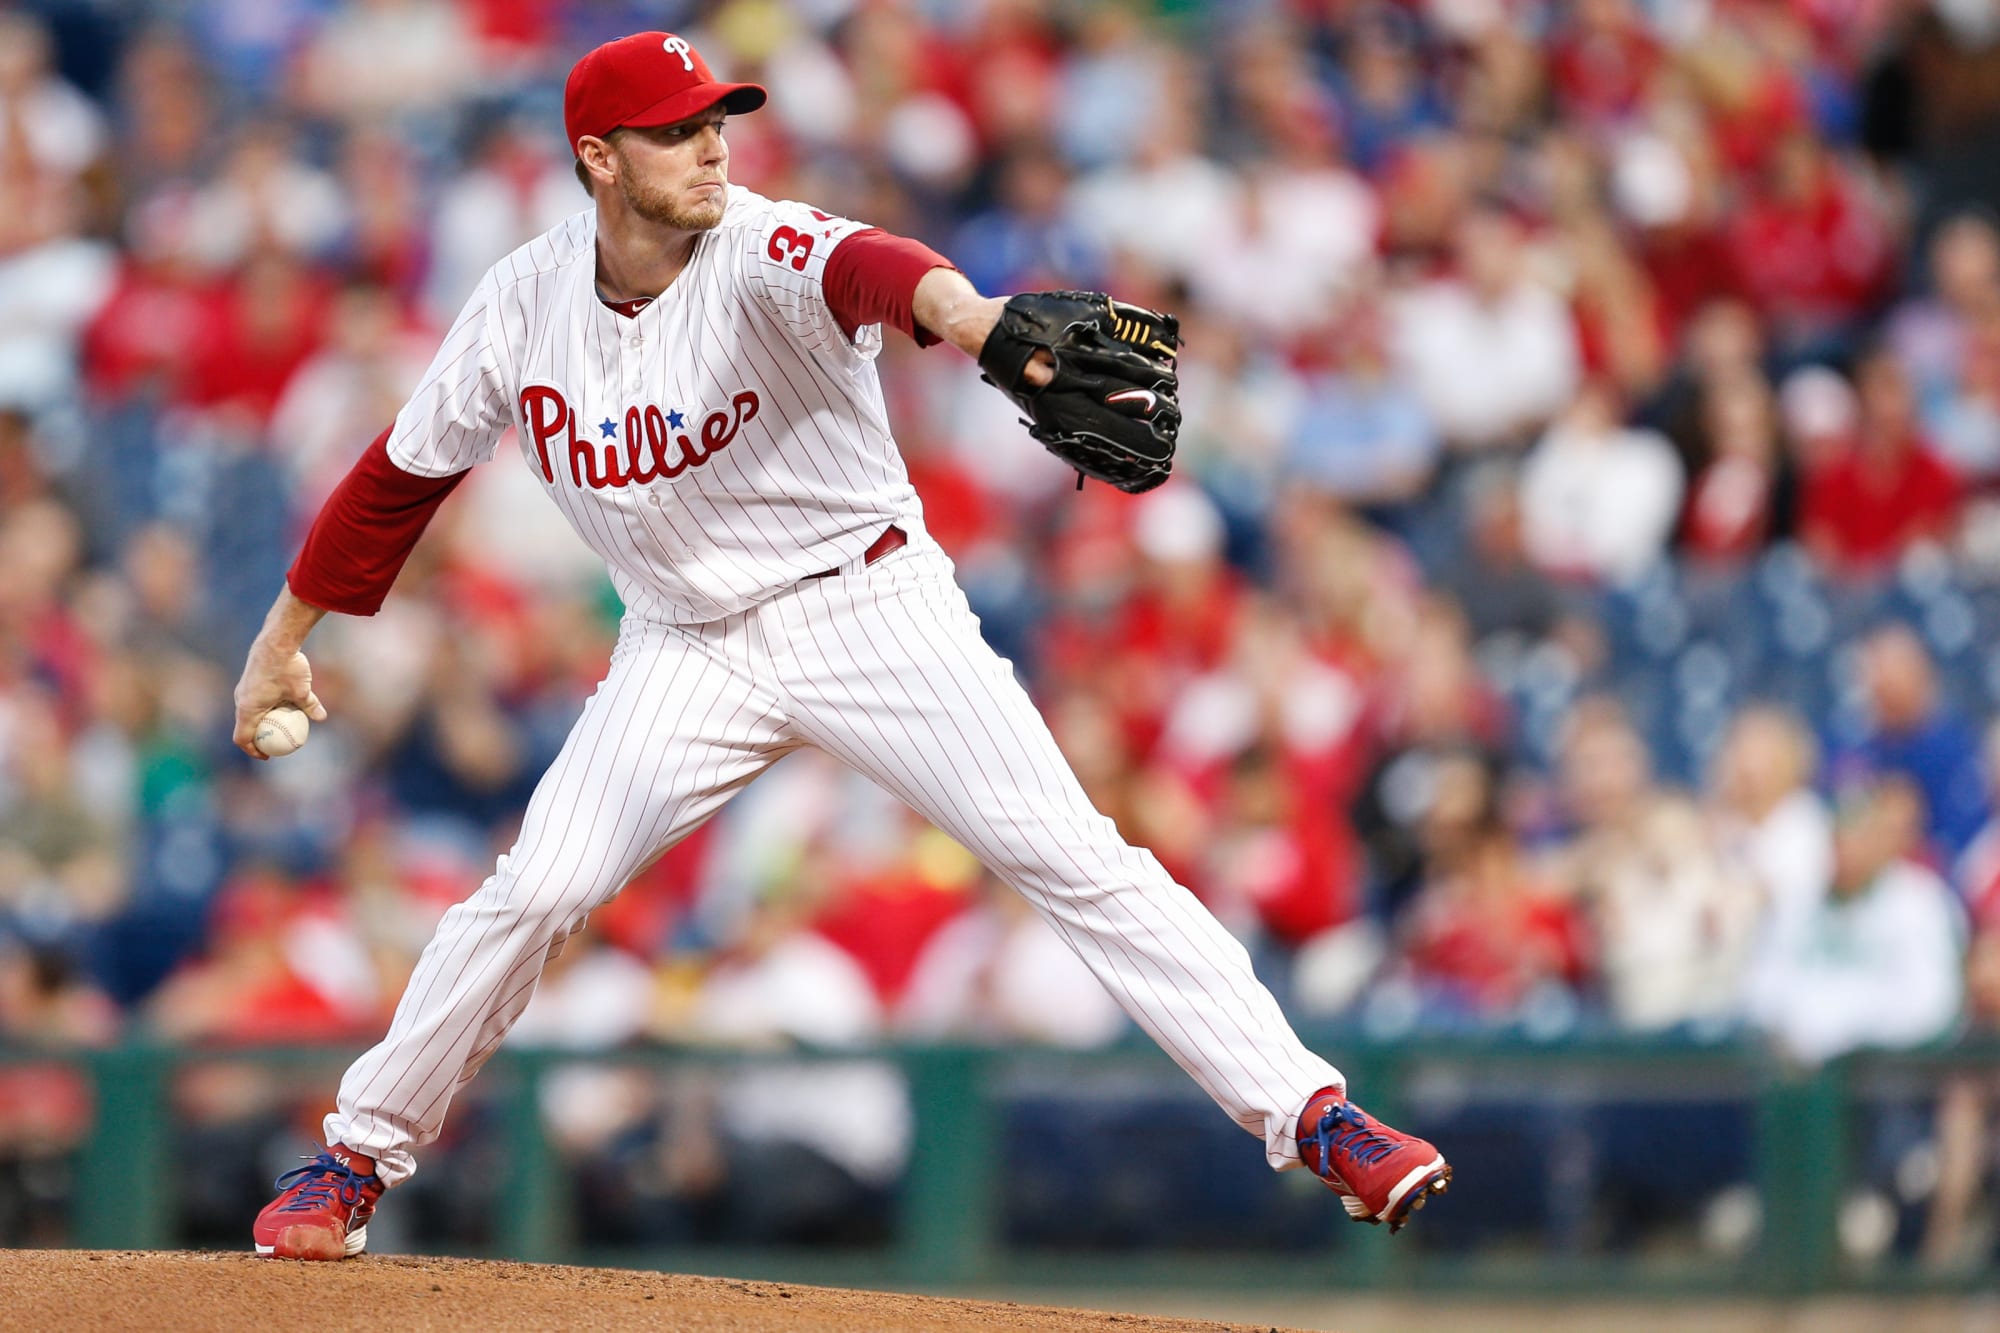 Phillies Top 5 starting pitchers since 1980